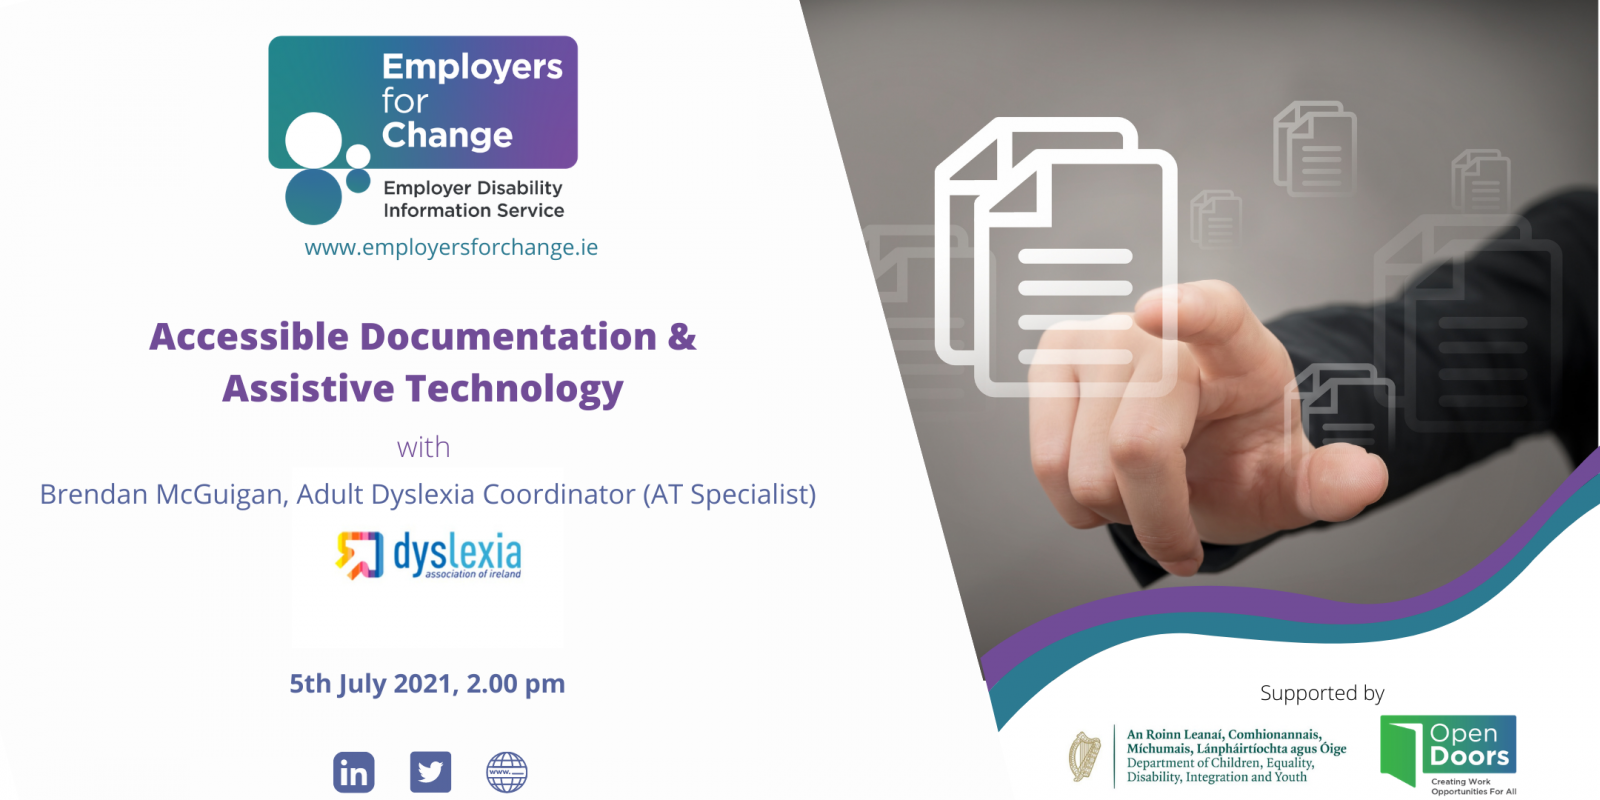 Accessible Documentation and Assistive Technology Seminar with Brendan McGuigan. Dyslexia Coordinator and AT Specialist at the Dyslexia Association of Ireland. Event hosted by Employers for Change and supported by Department of Children, Equality, Disability, Integration and Youth.  